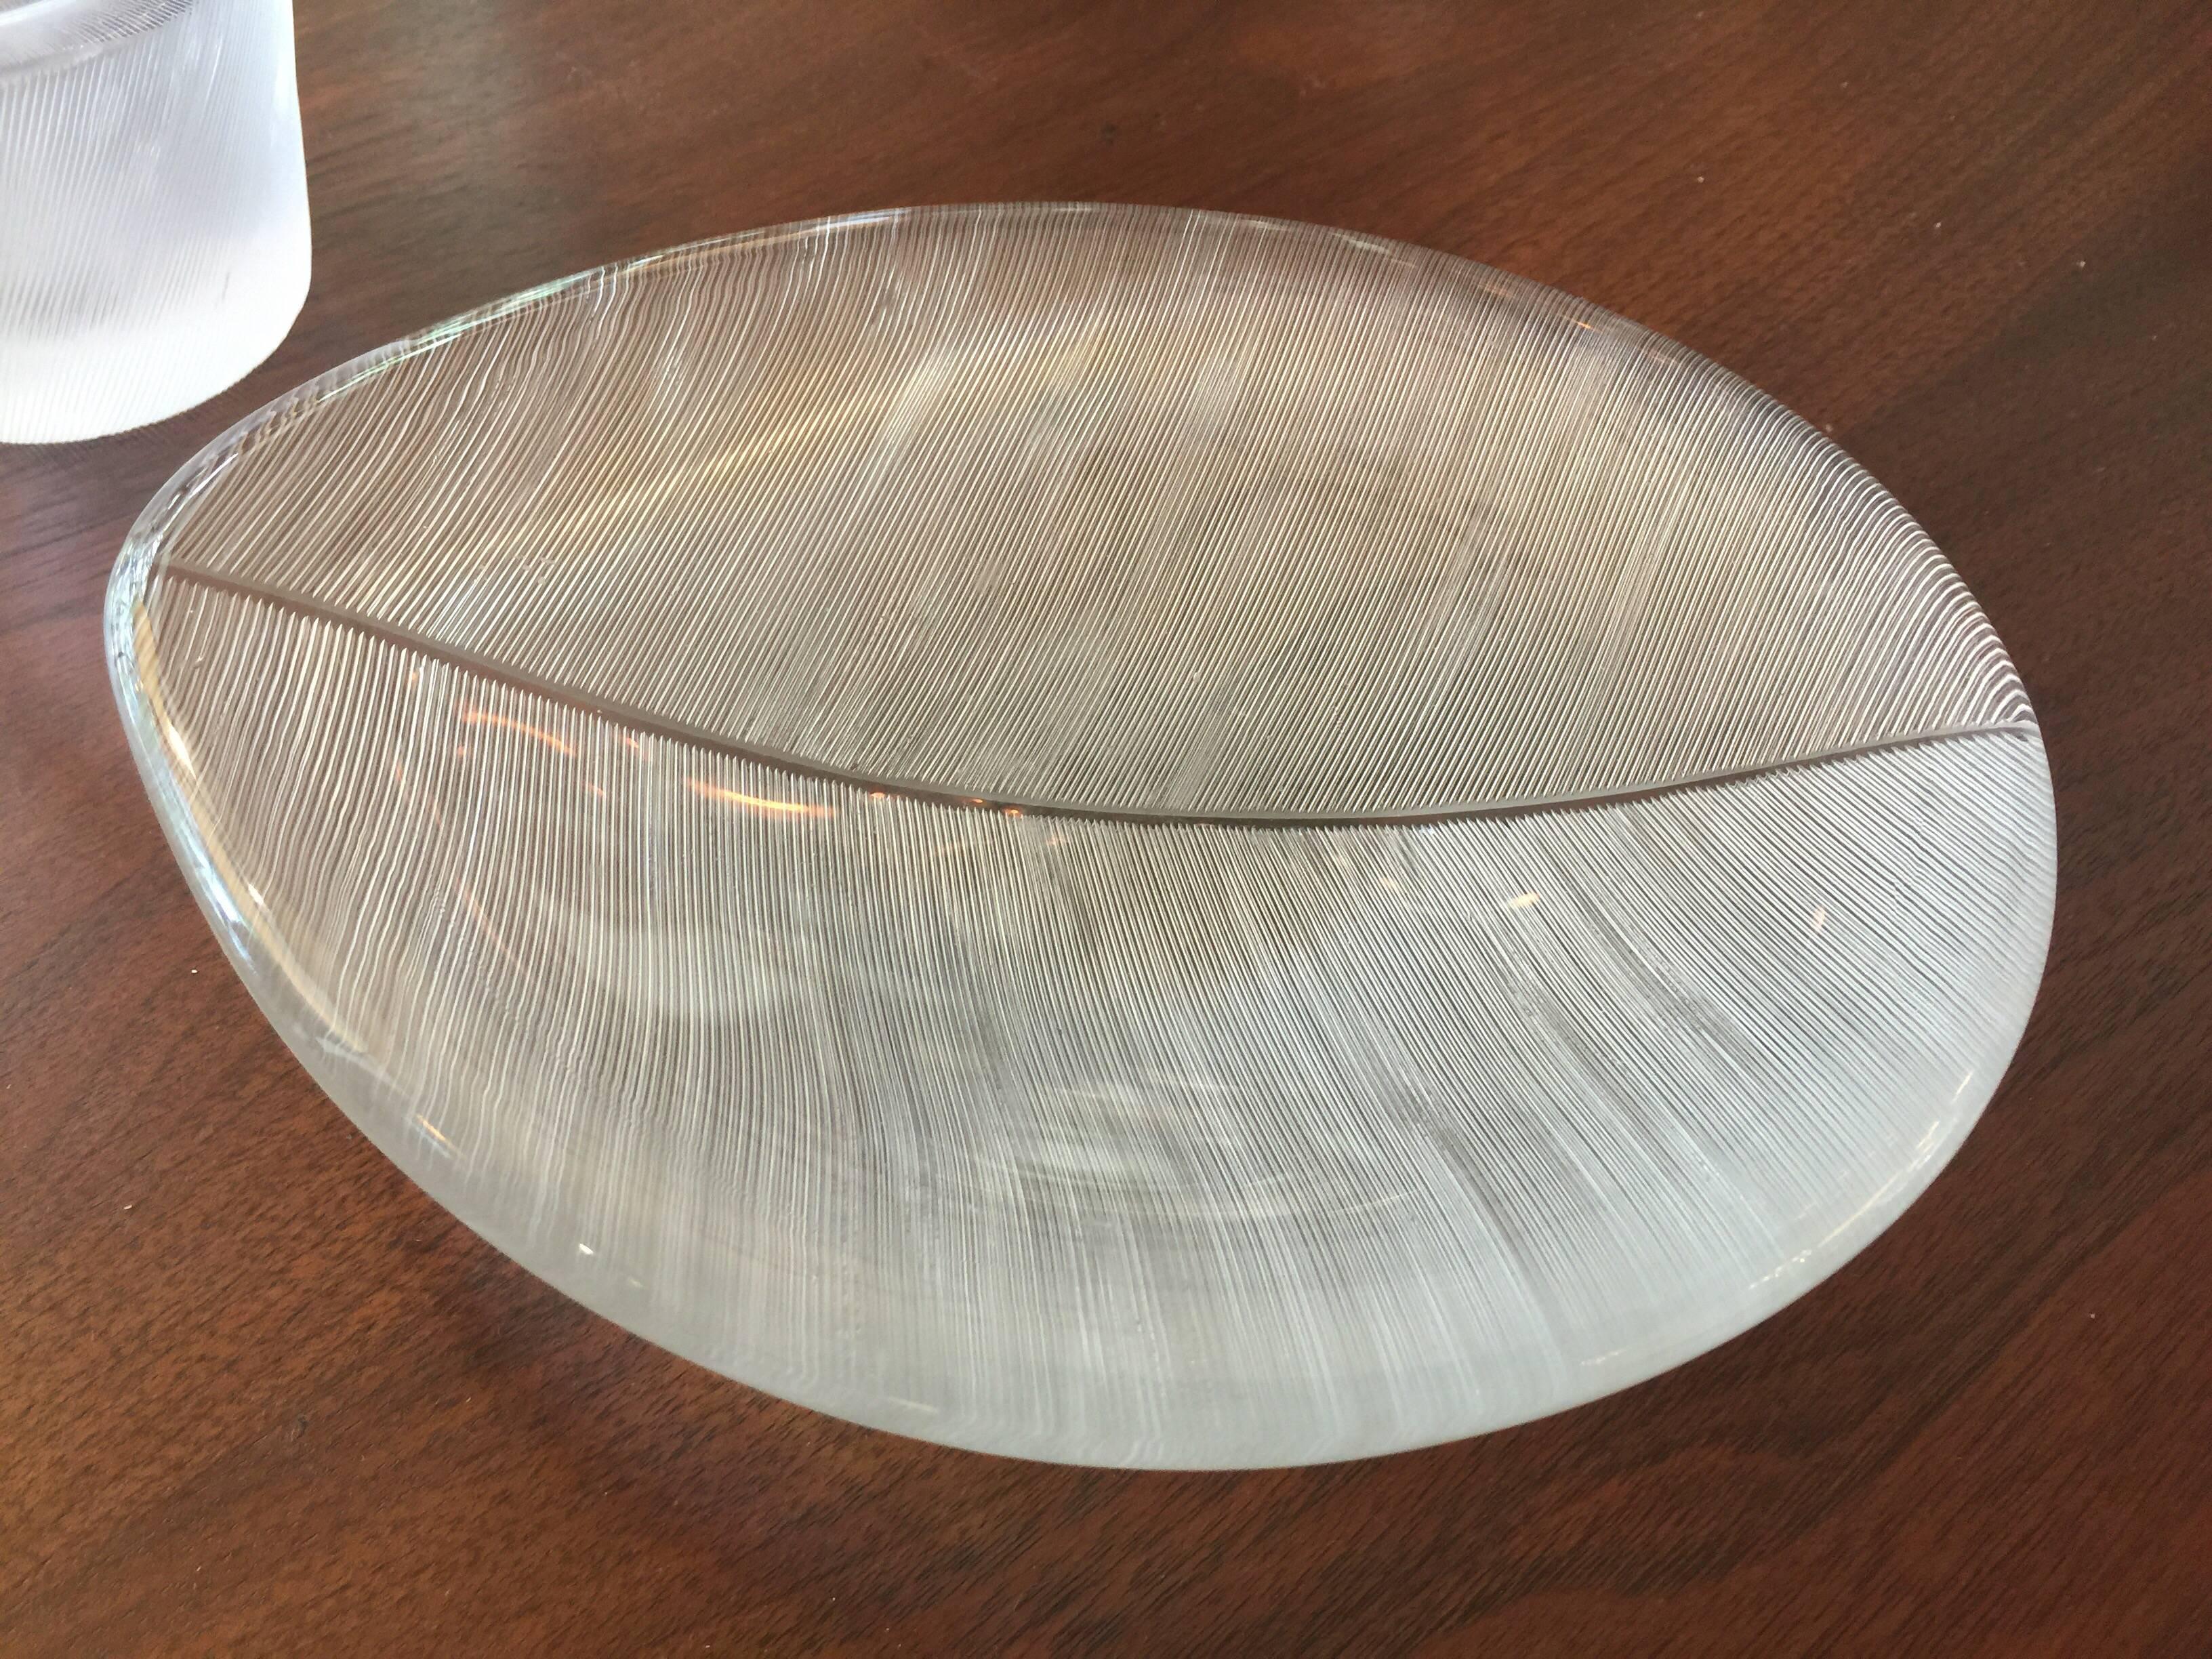 This lovely and signed set of four glass pieces produced by Iittala in line cut engraved forms. Three of the larger bowls have full and distinct signatures along the edges. These exquisite pieces can easily be used in a bar or desk area. 